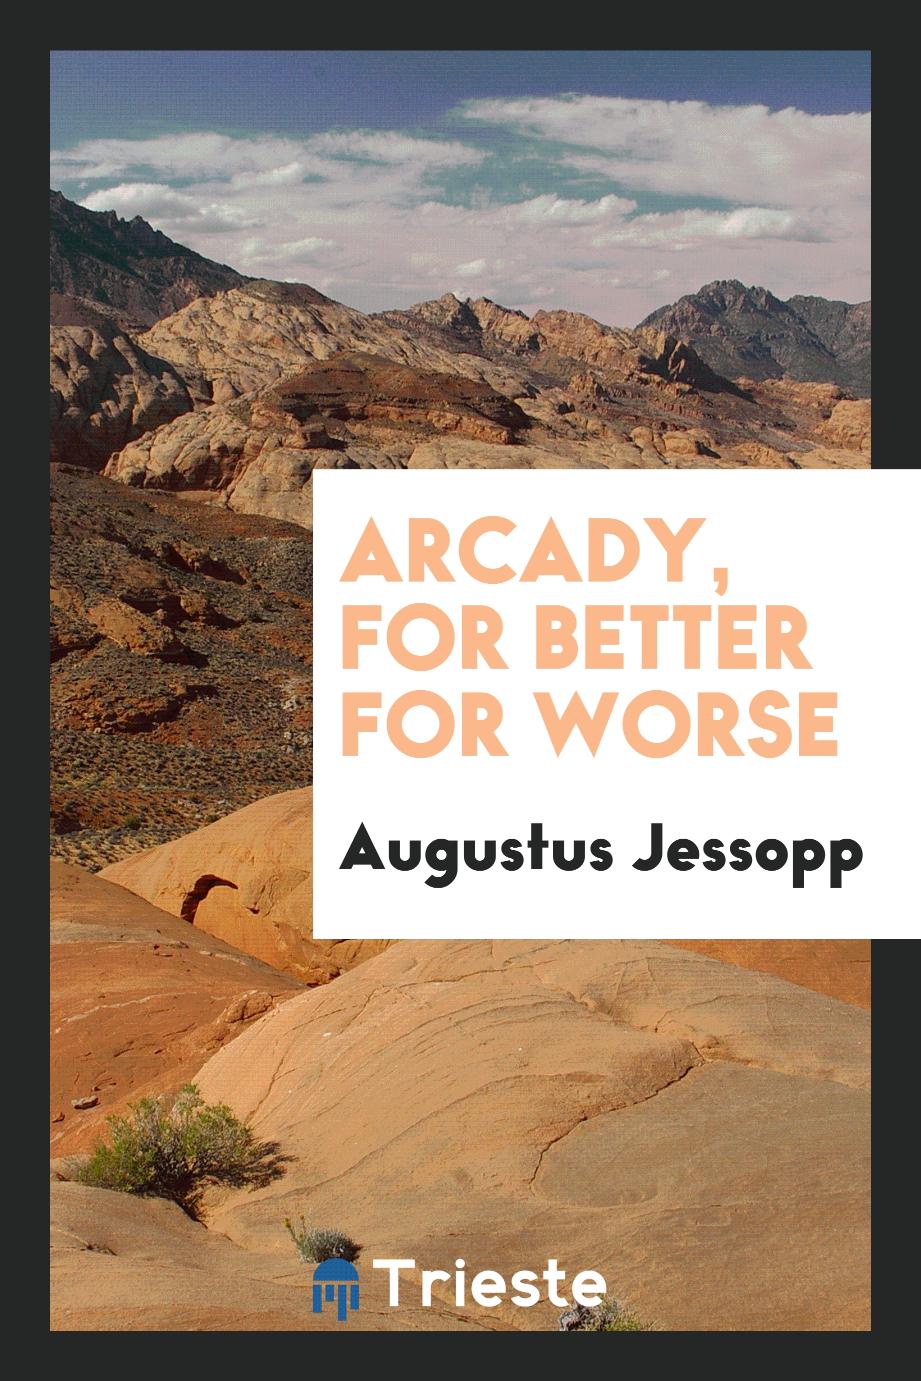 Arcady, for better for worse